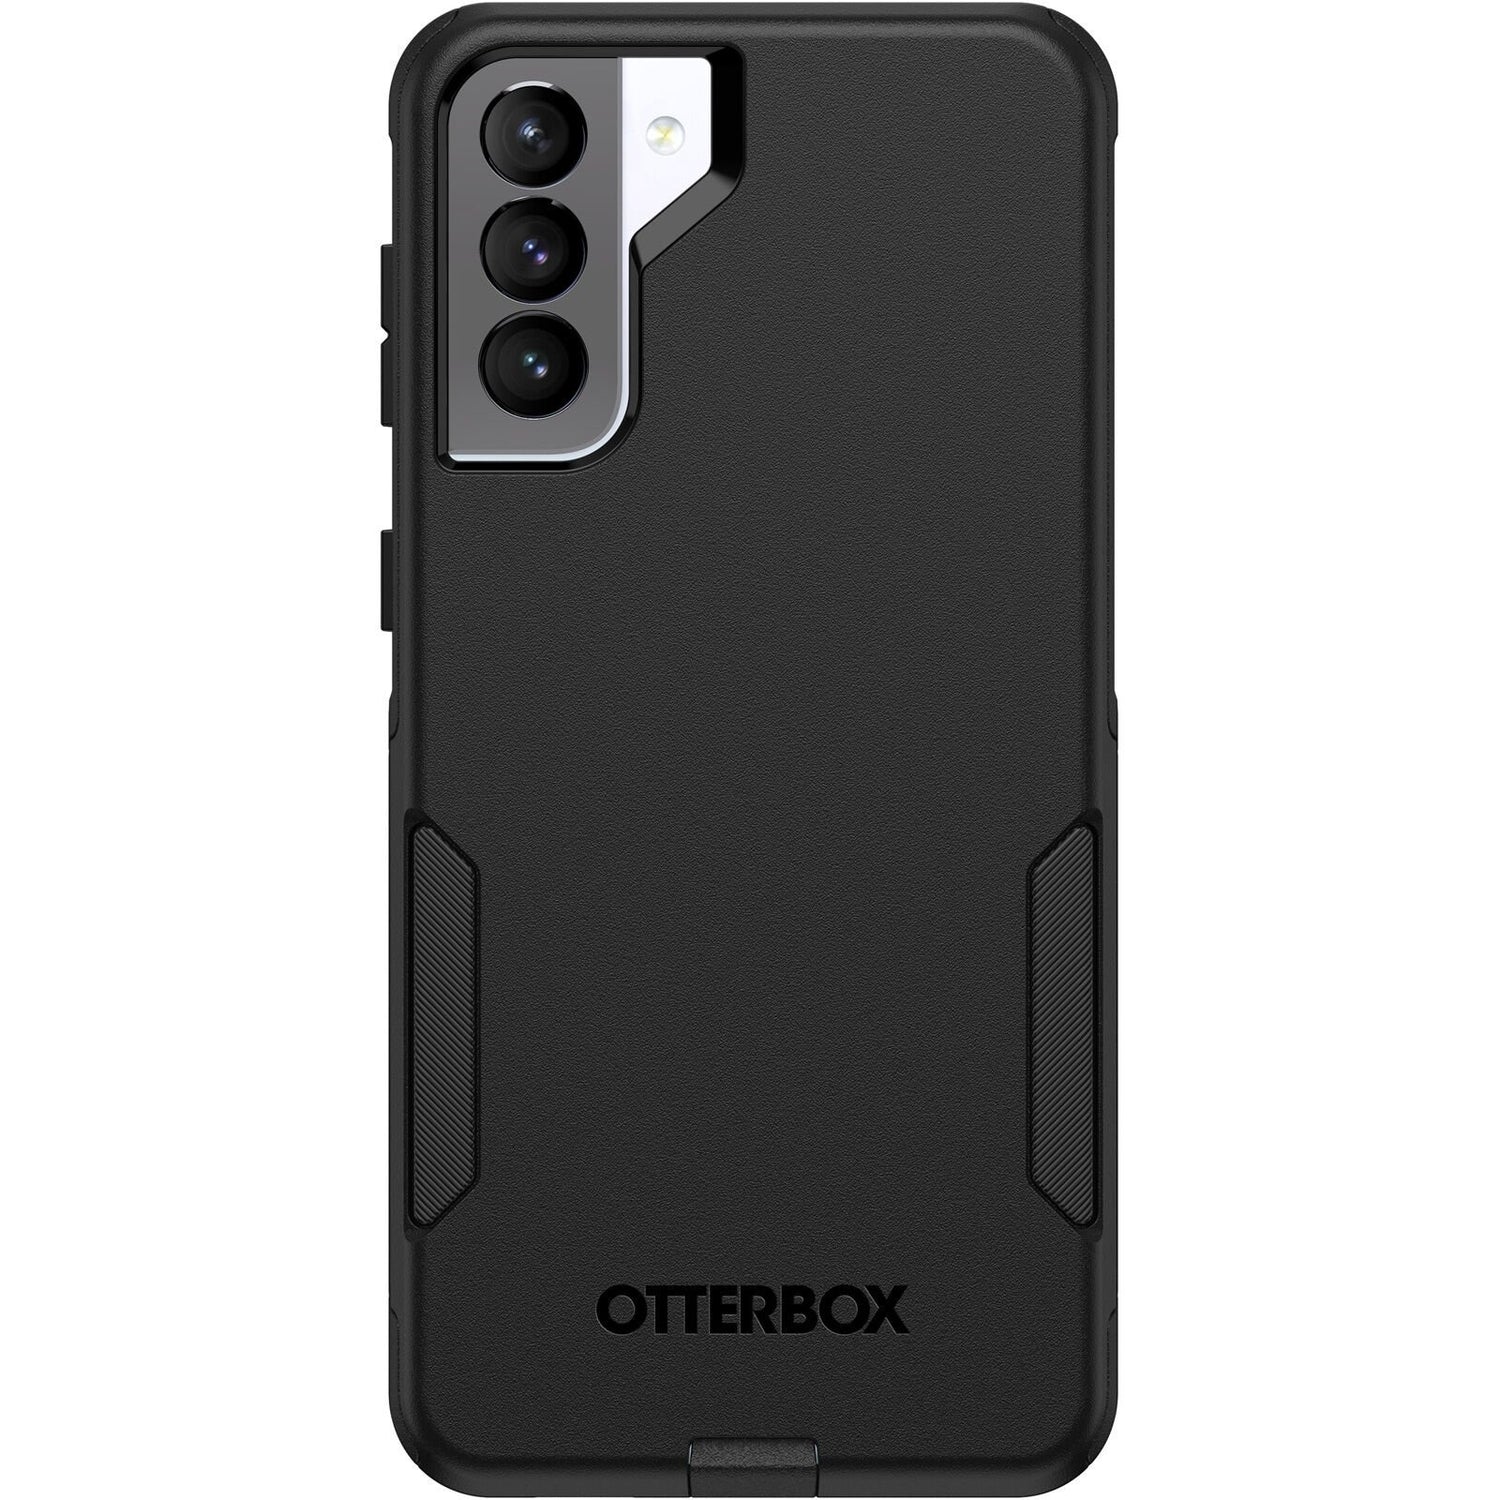 OtterBox COMMUTER SERIES Case for Samsung Galaxy S21+ 5G - Black (Certified Refurbished)